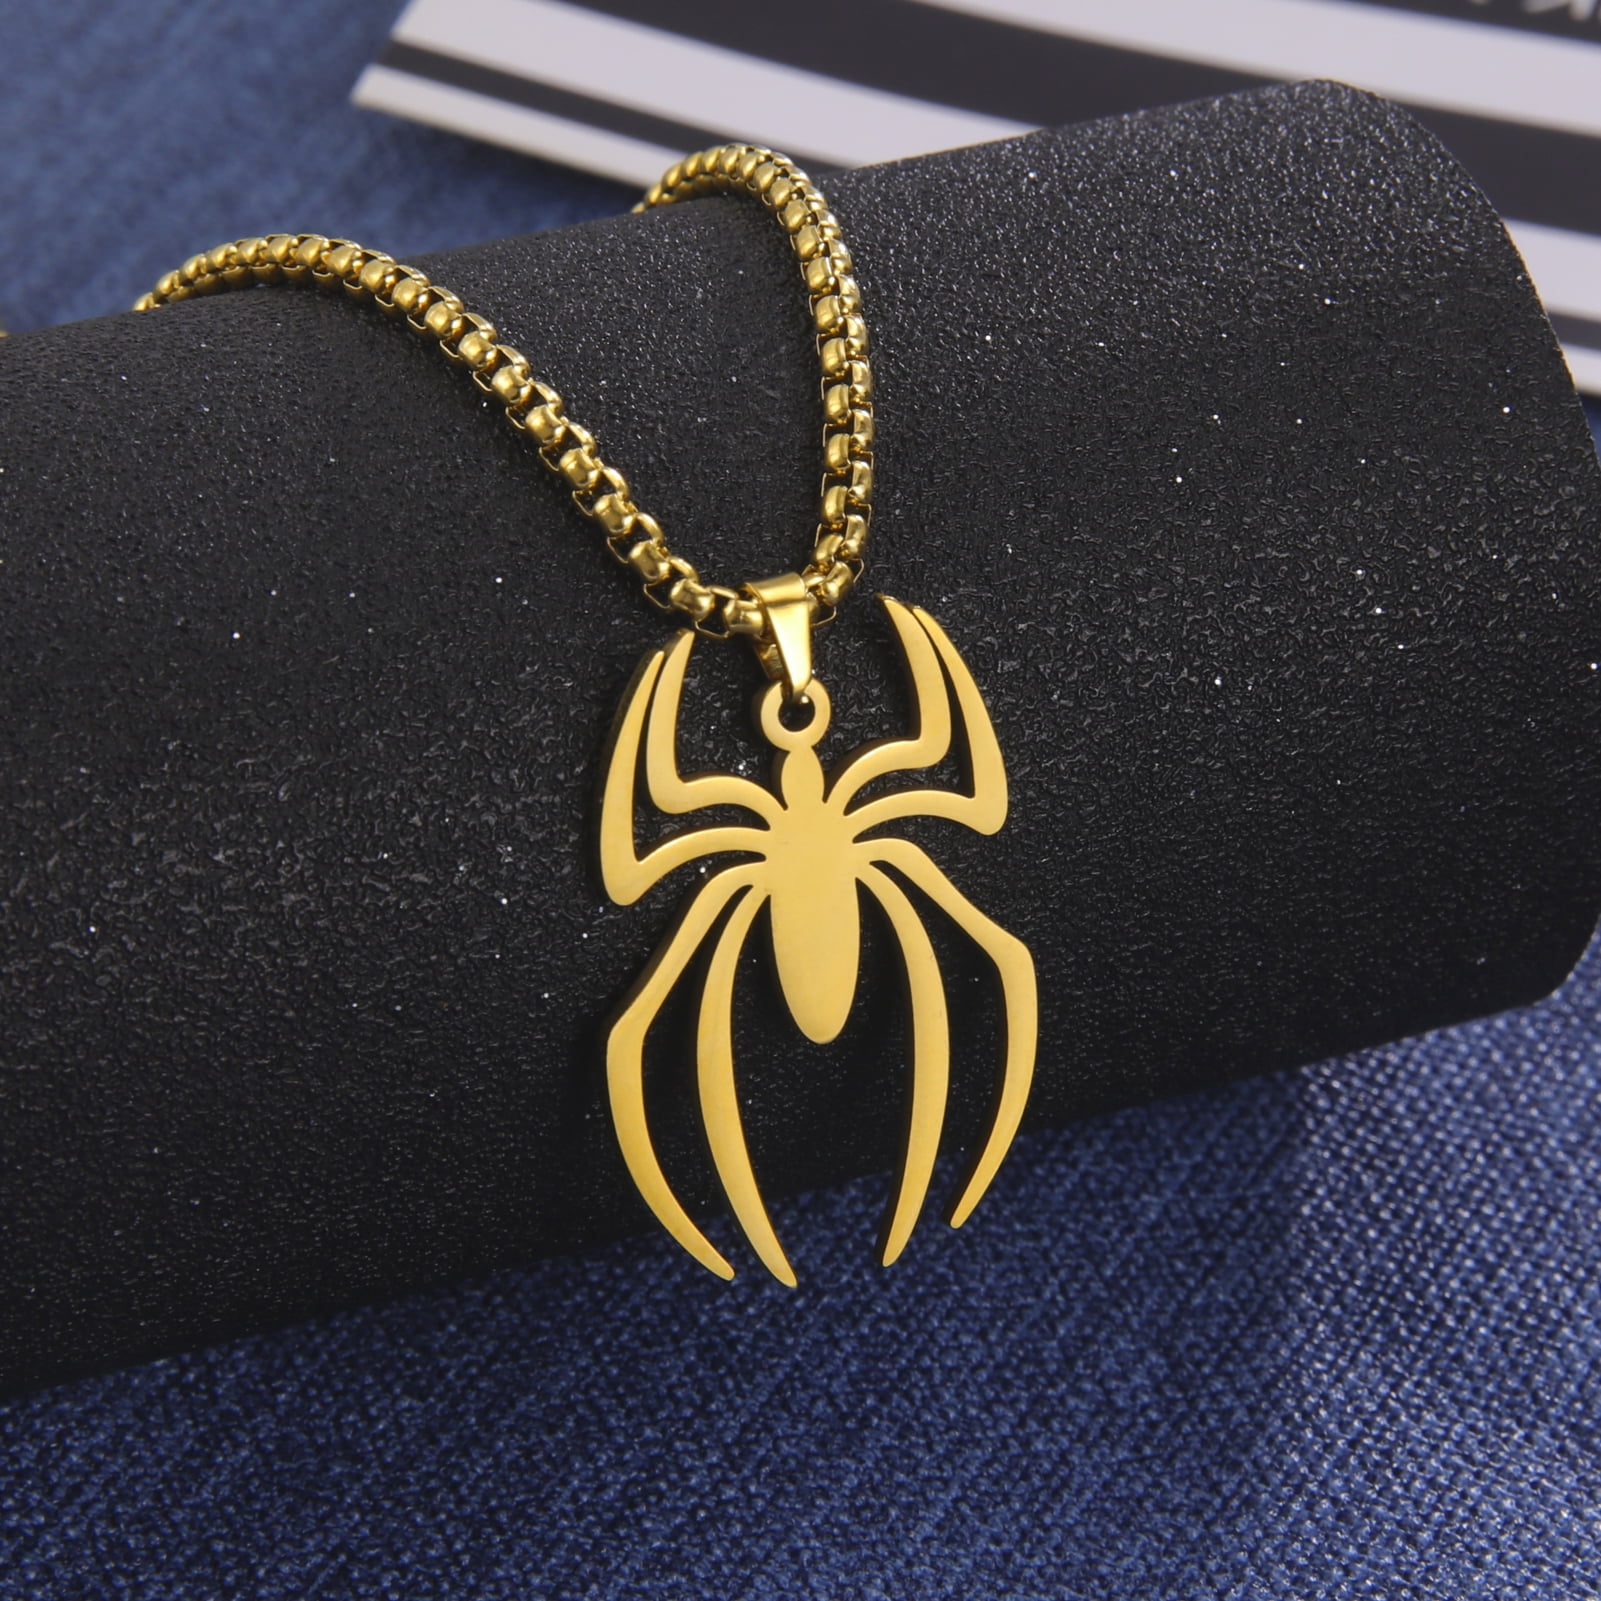 EUEAVAN Gold Spider Pendant Necklace Stainless Steel Box Chain Animal ...